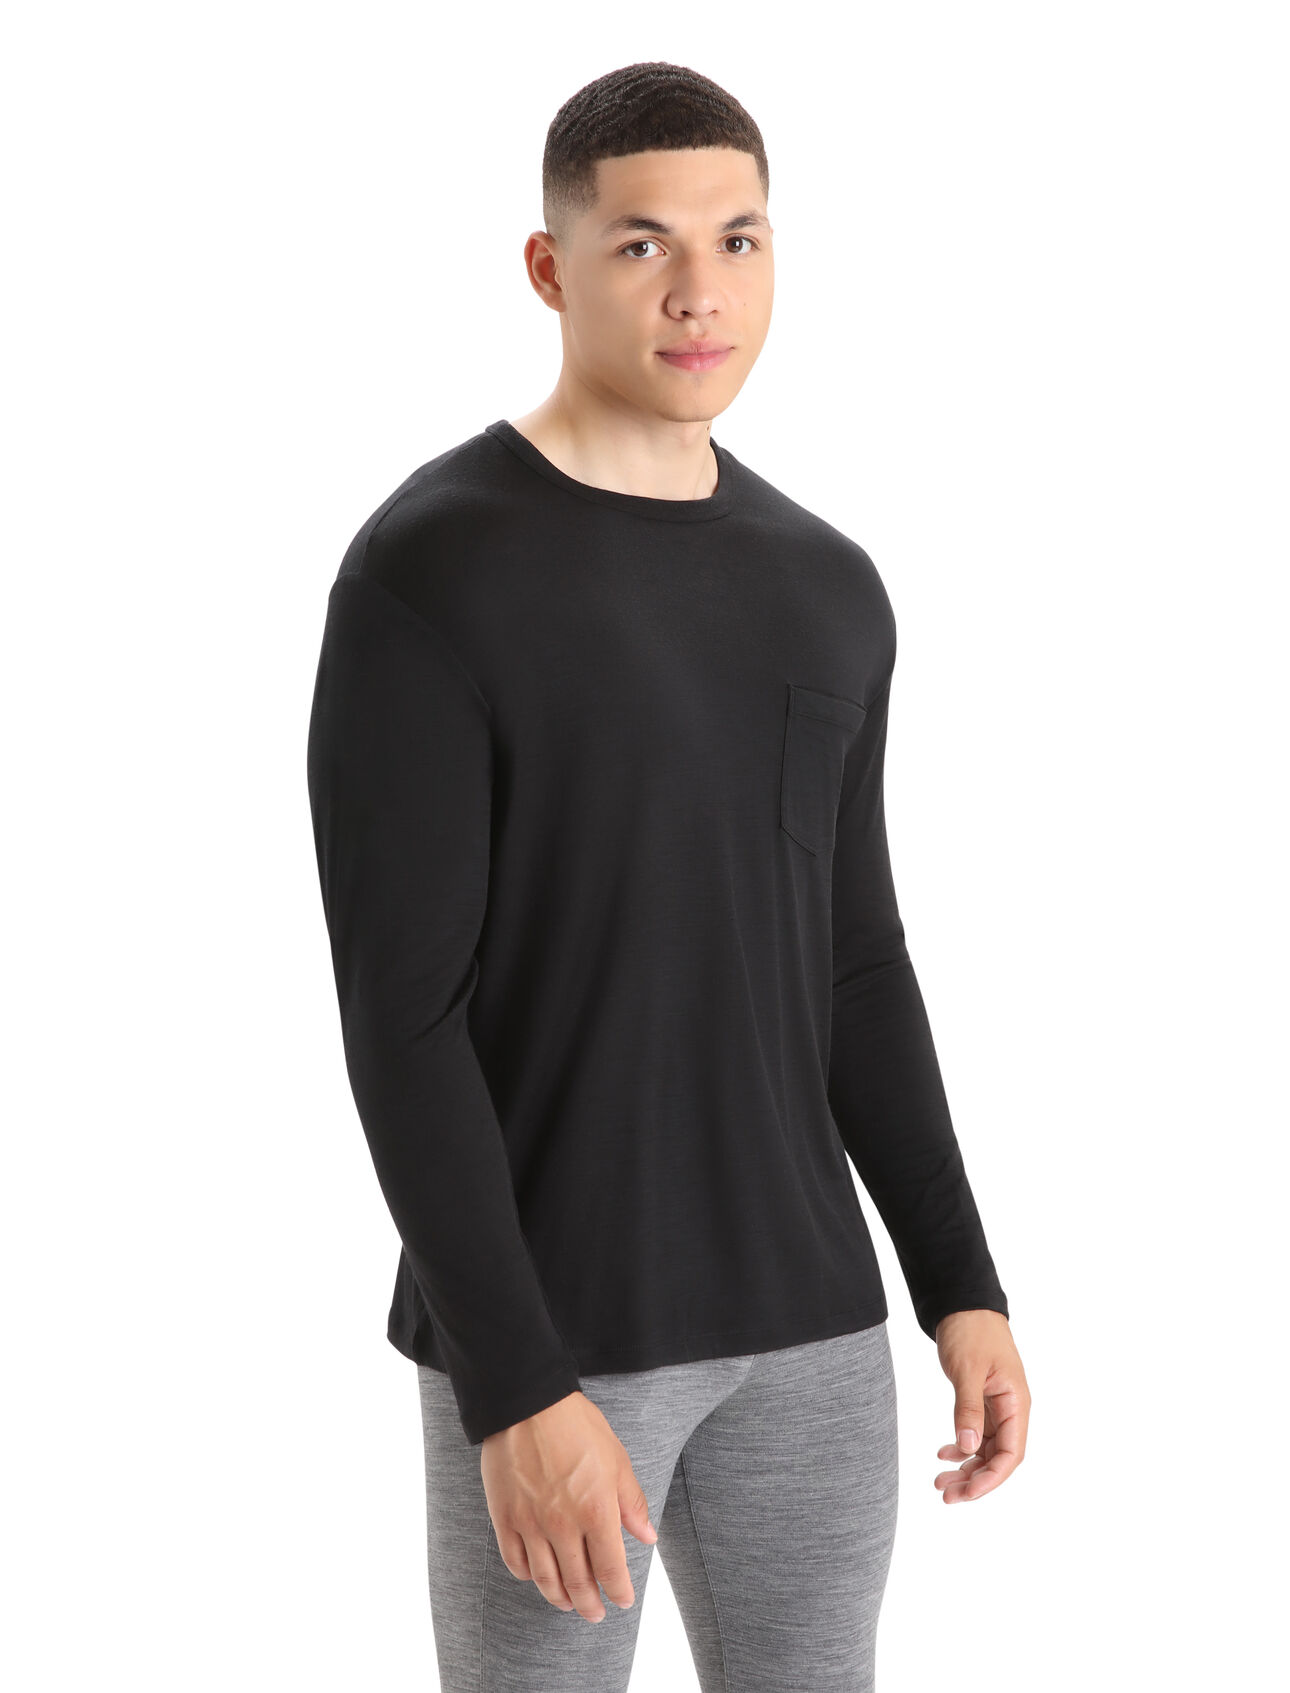 Mens Merino Granary Long Sleeve Pocket Tee A classic pocket tee with a relaxed fit and soft, breathable, 100% merino wool fabric, the Granary Long Sleeve Pocket Tee is all about everyday comfort and style.